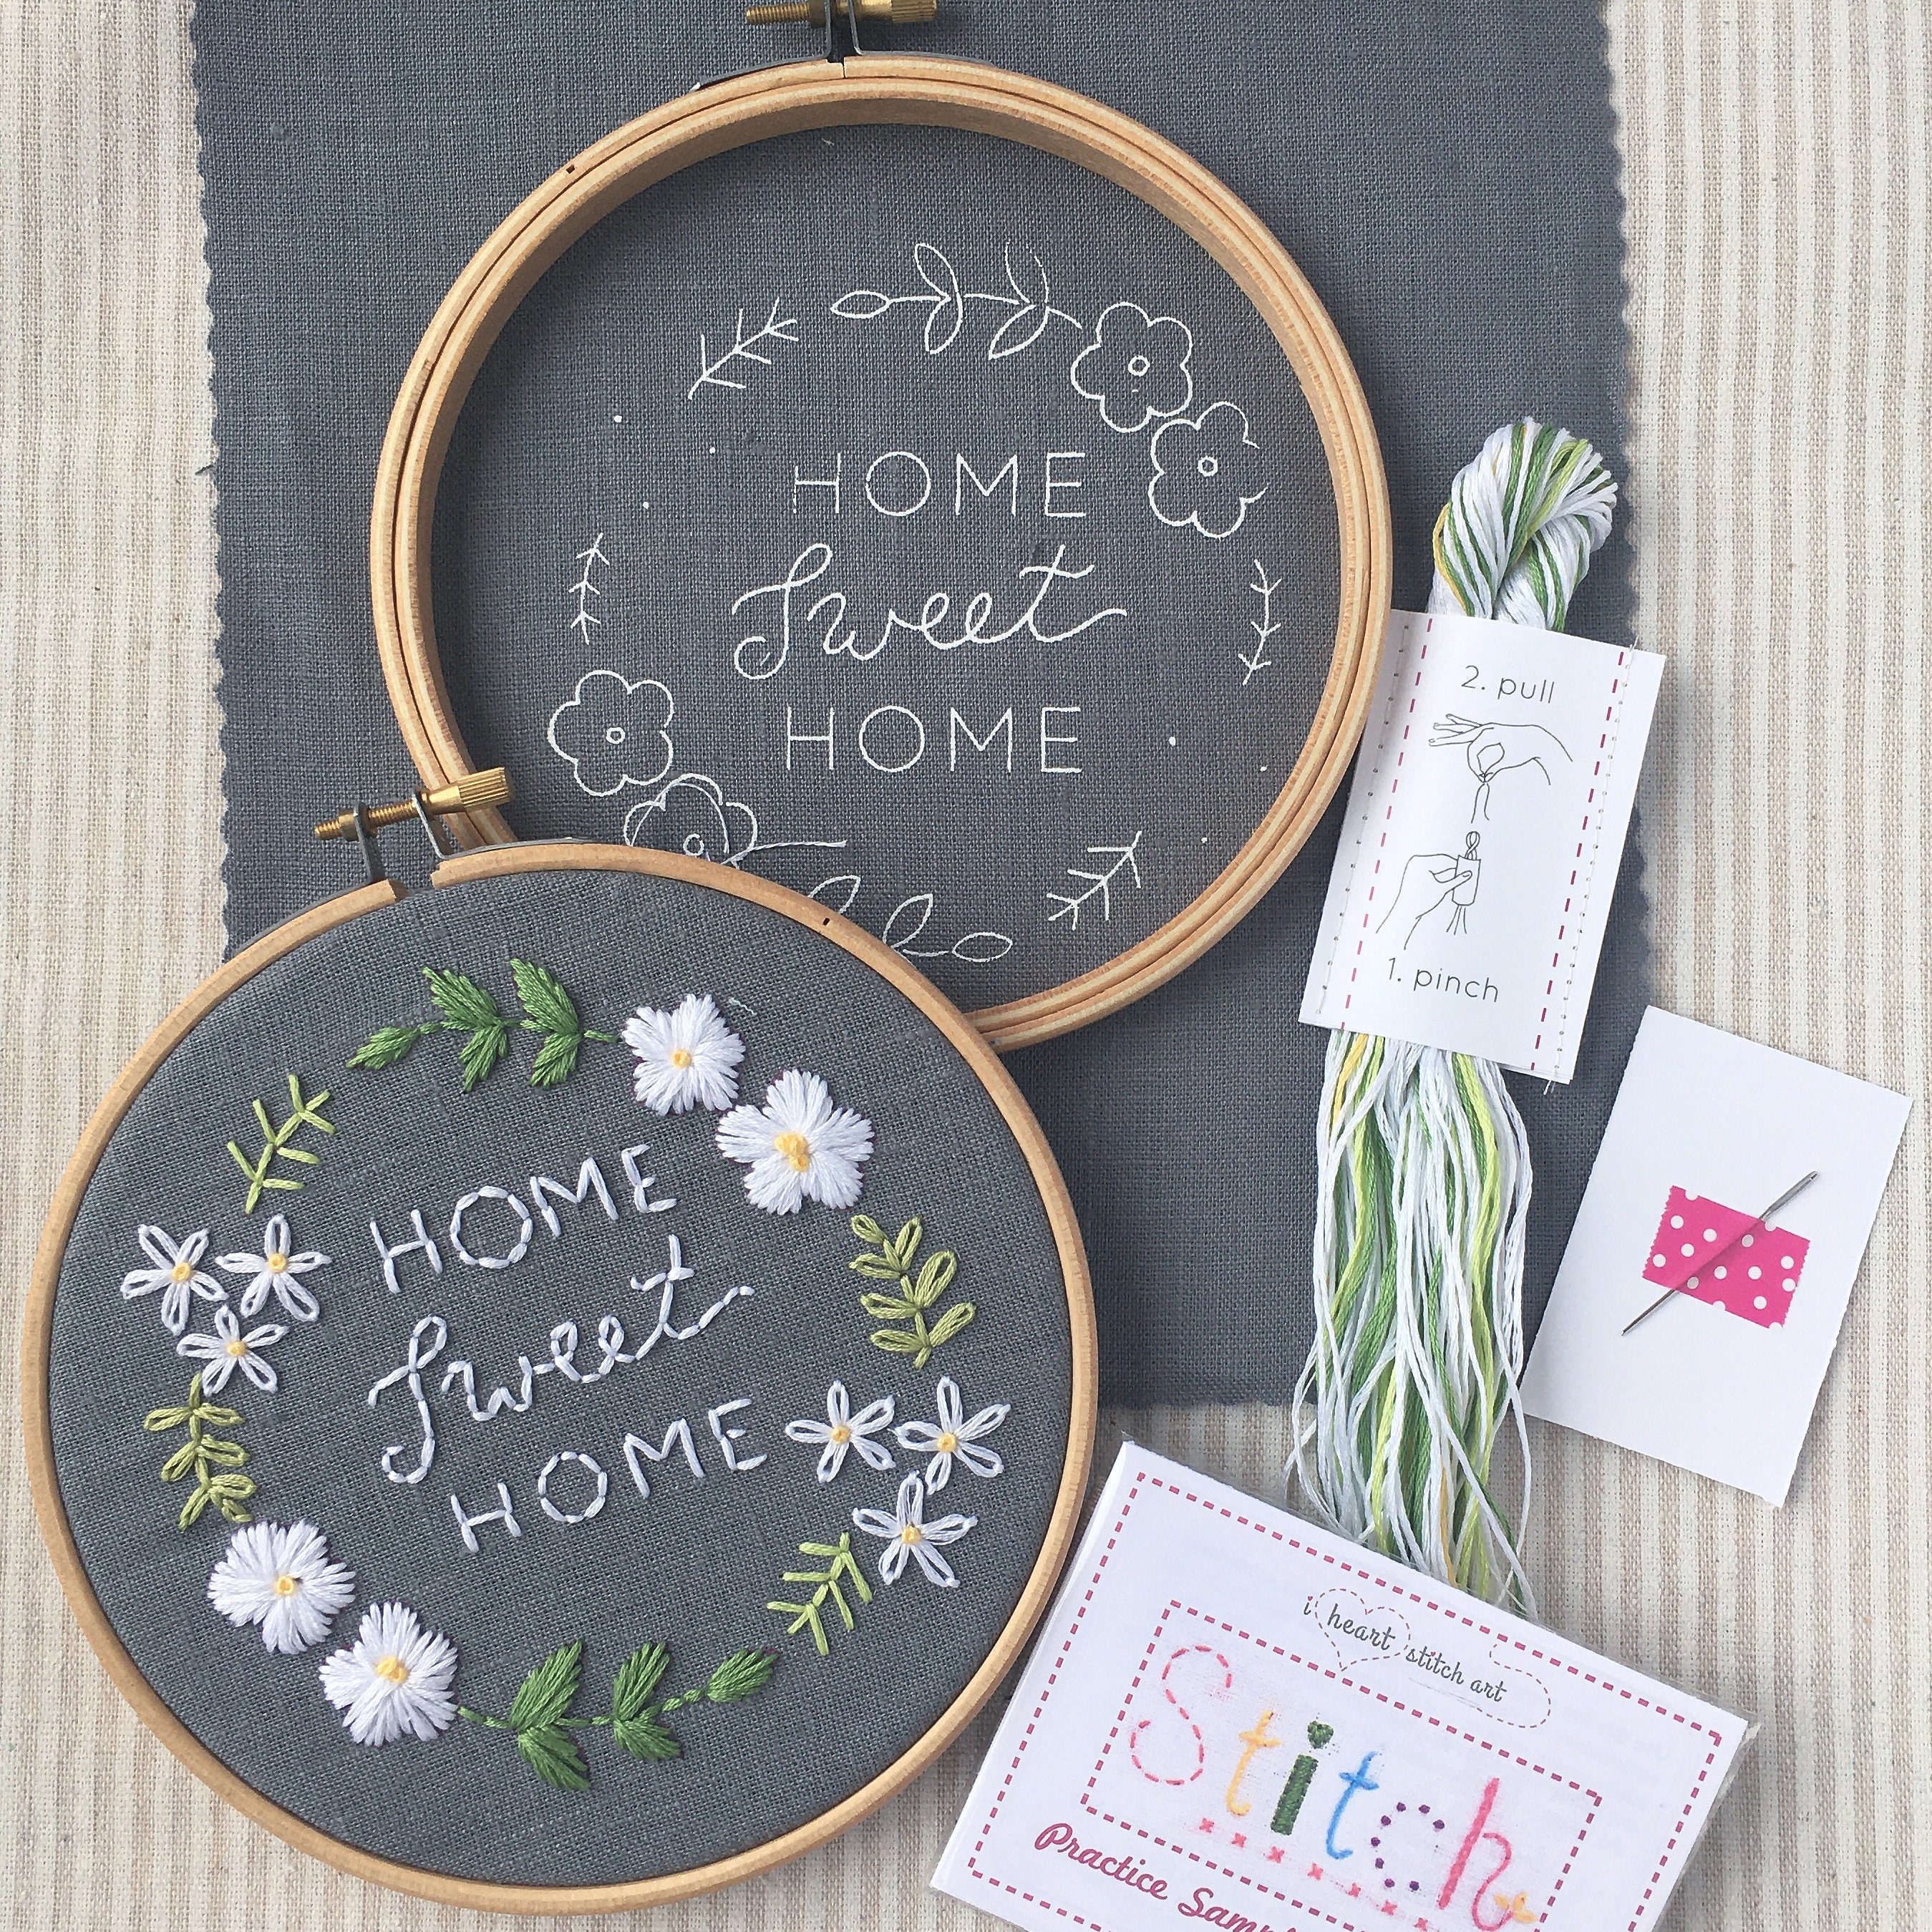 Easy Embroidery Kit: Home Sweet Home 